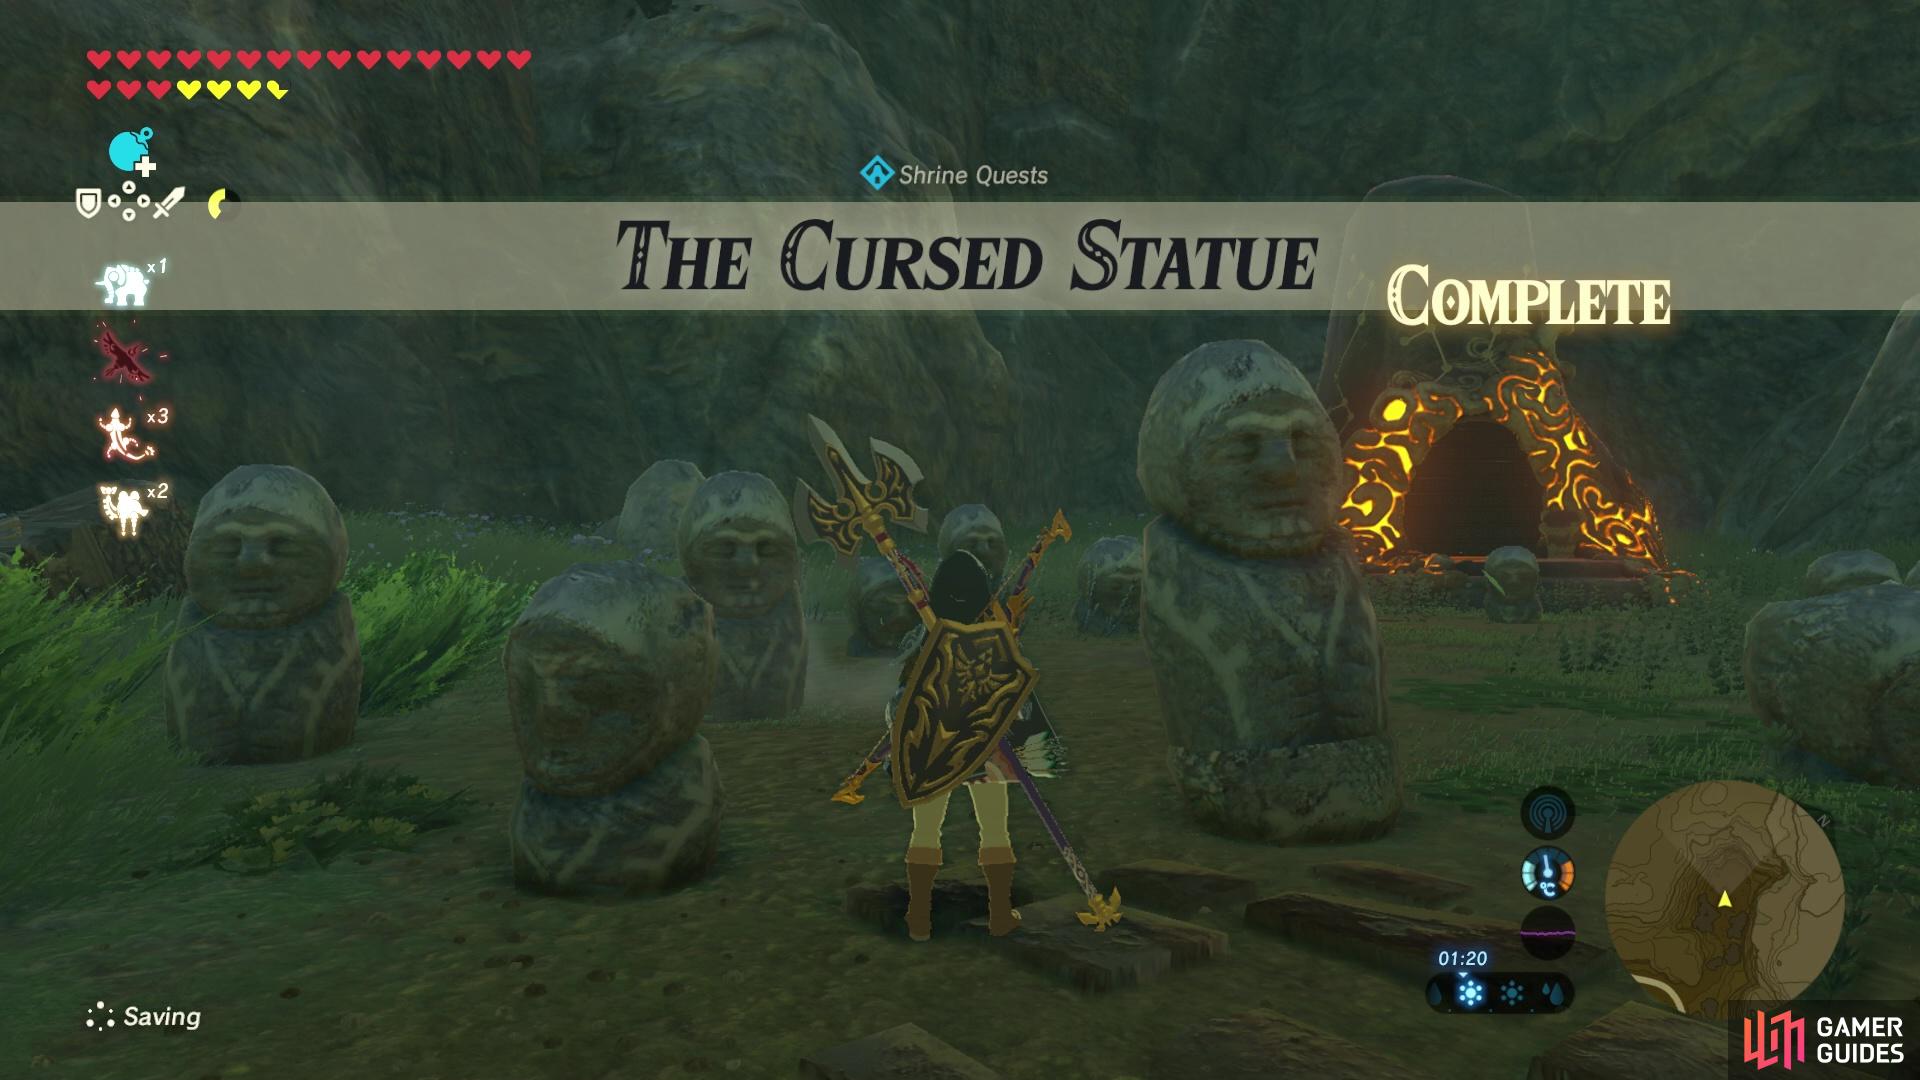 When you’ve destroyed the cursed statue you’ll be able to access the shrine!